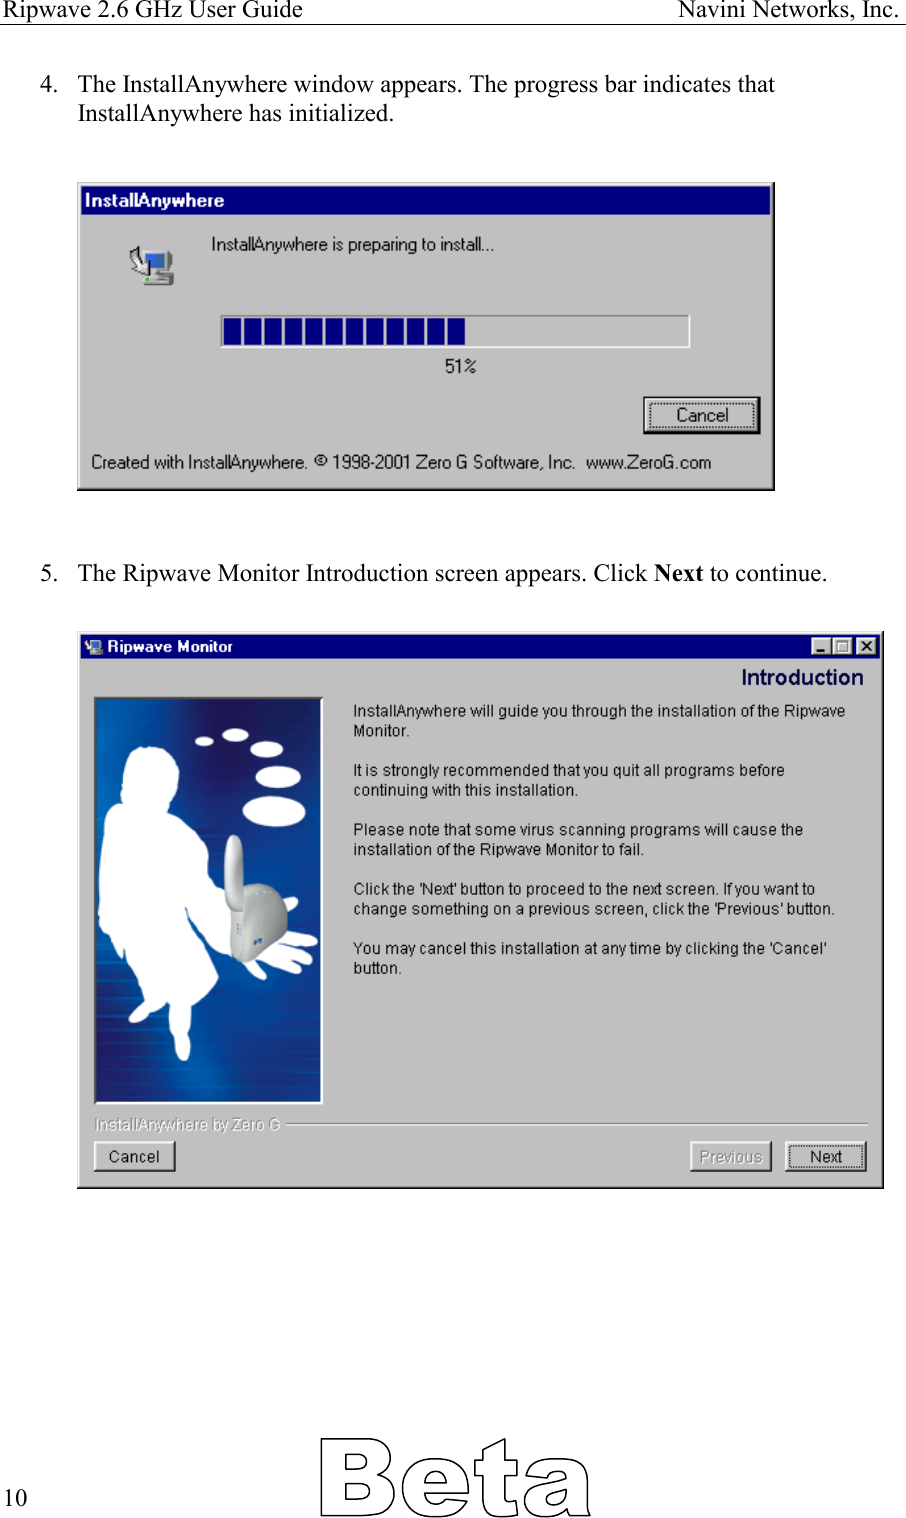 Ripwave 2.6 GHz User Guide                                                            Navini Networks, Inc. 4.  The InstallAnywhere window appears. The progress bar indicates that InstallAnywhere has initialized.                5.  The Ripwave Monitor Introduction screen appears. Click Next to continue.                                  10